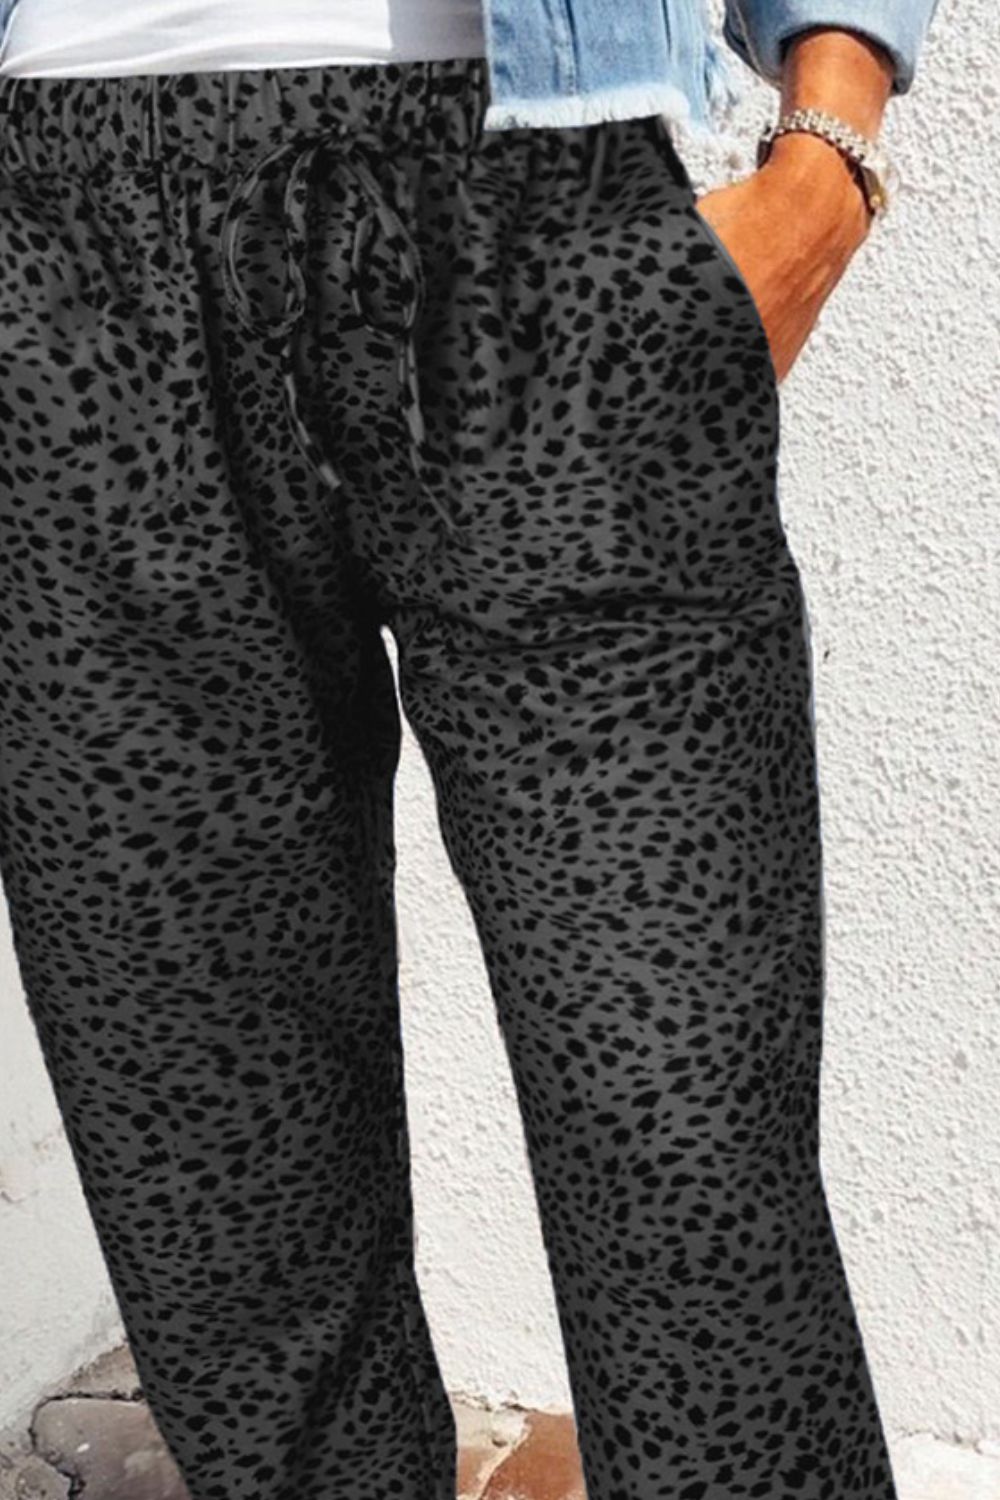 Trendsi Cupid Beauty Supplies Women Pants Double Take Leopard Print Joggers with Pockets